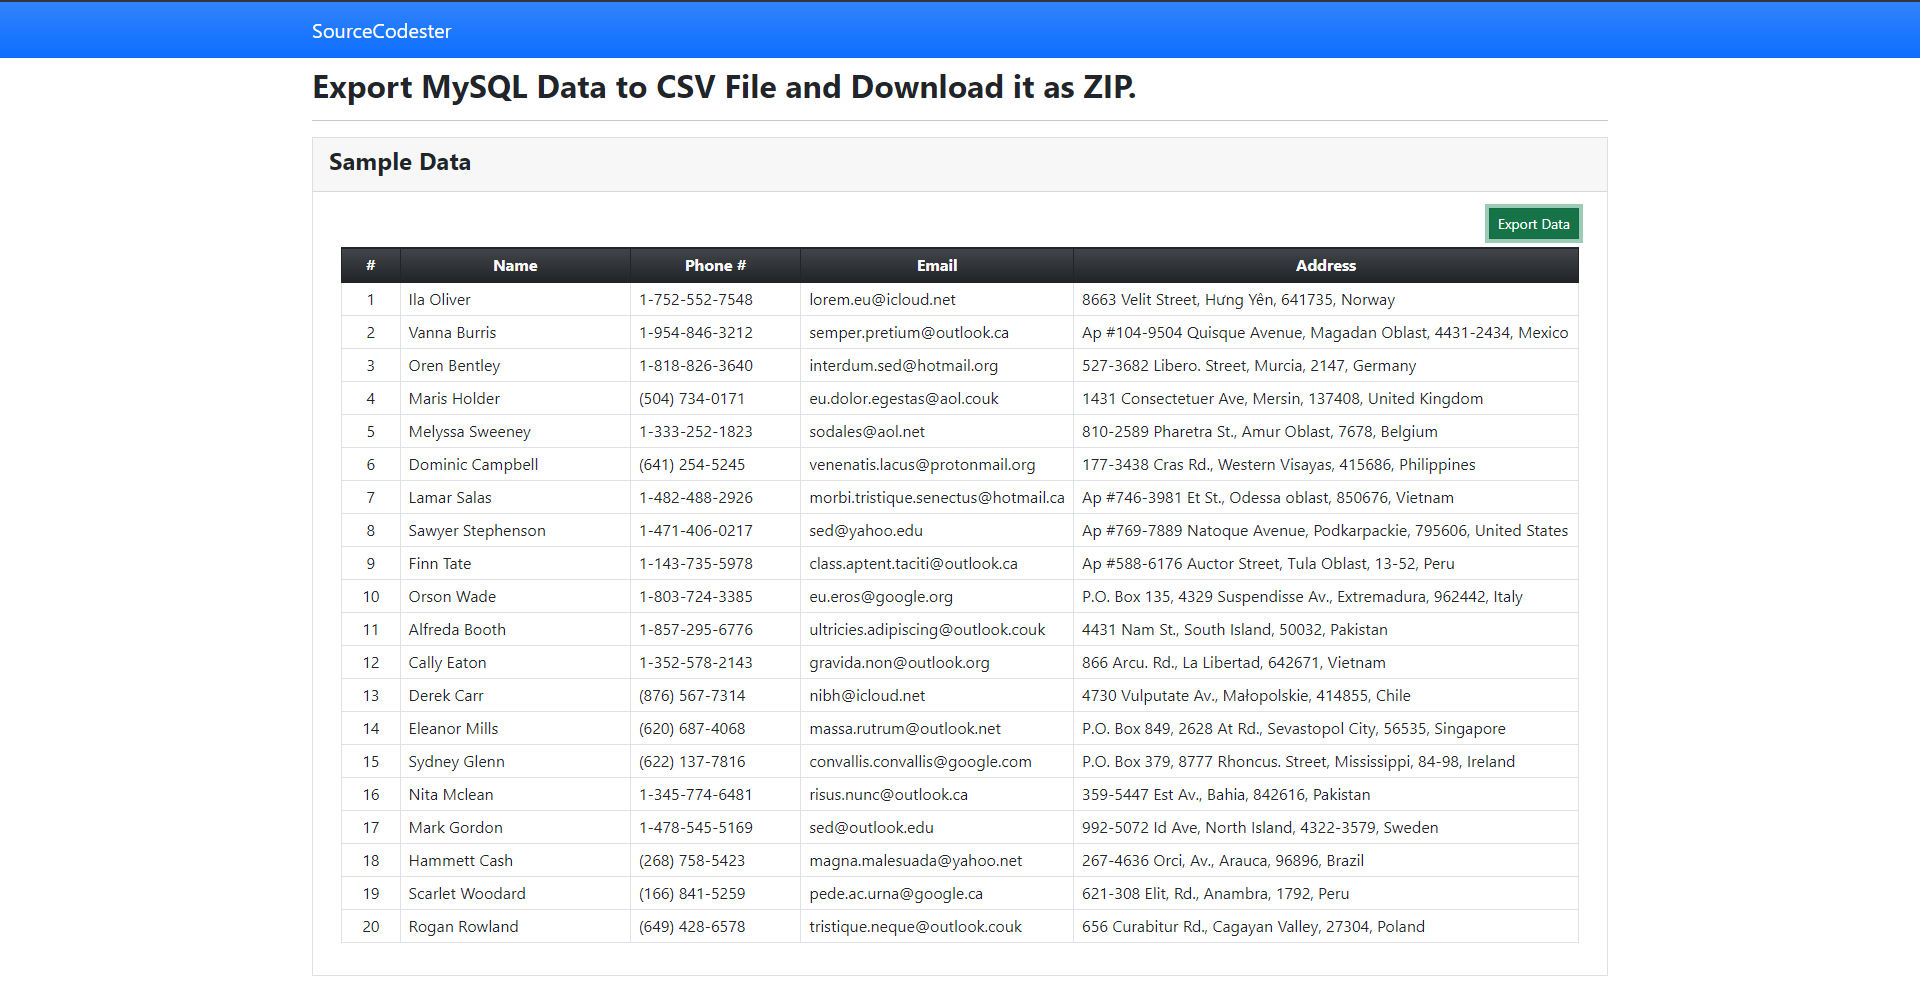 Exporting MYSQL Data to CSV and download it as zip